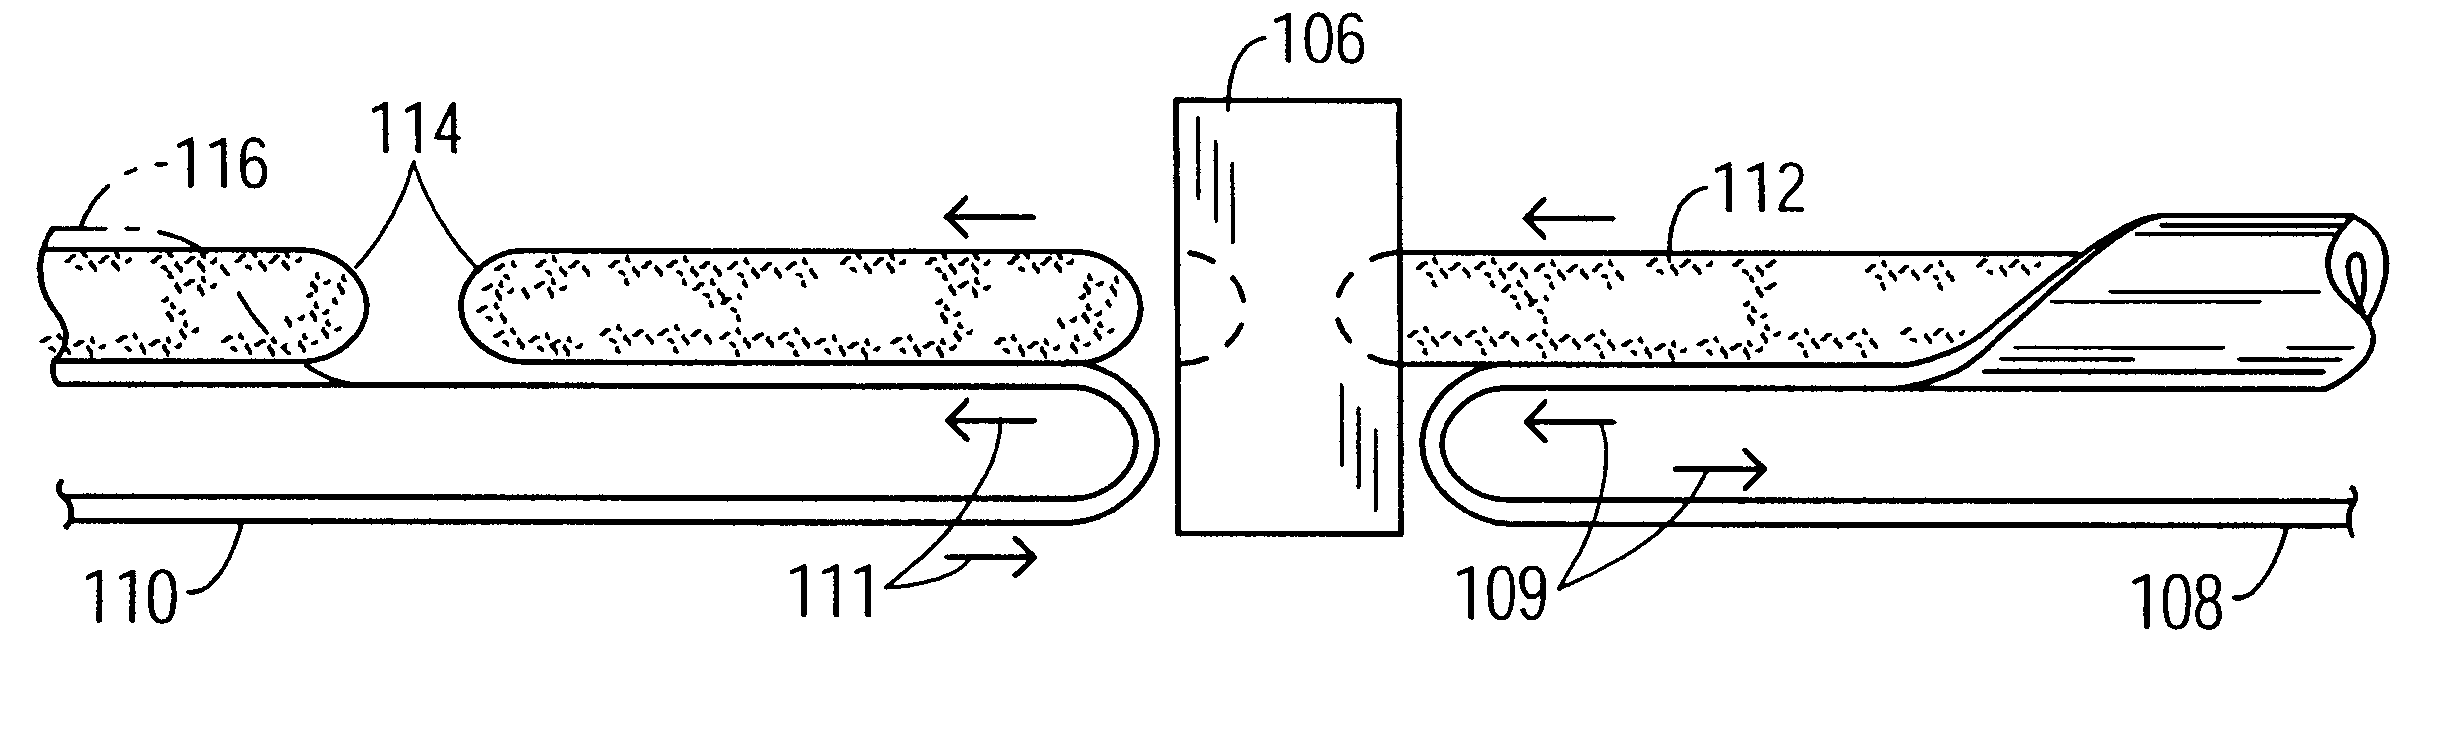 Skinless sausage or frankfurter manufacturing method and apparatus utilizing reusable deformable support